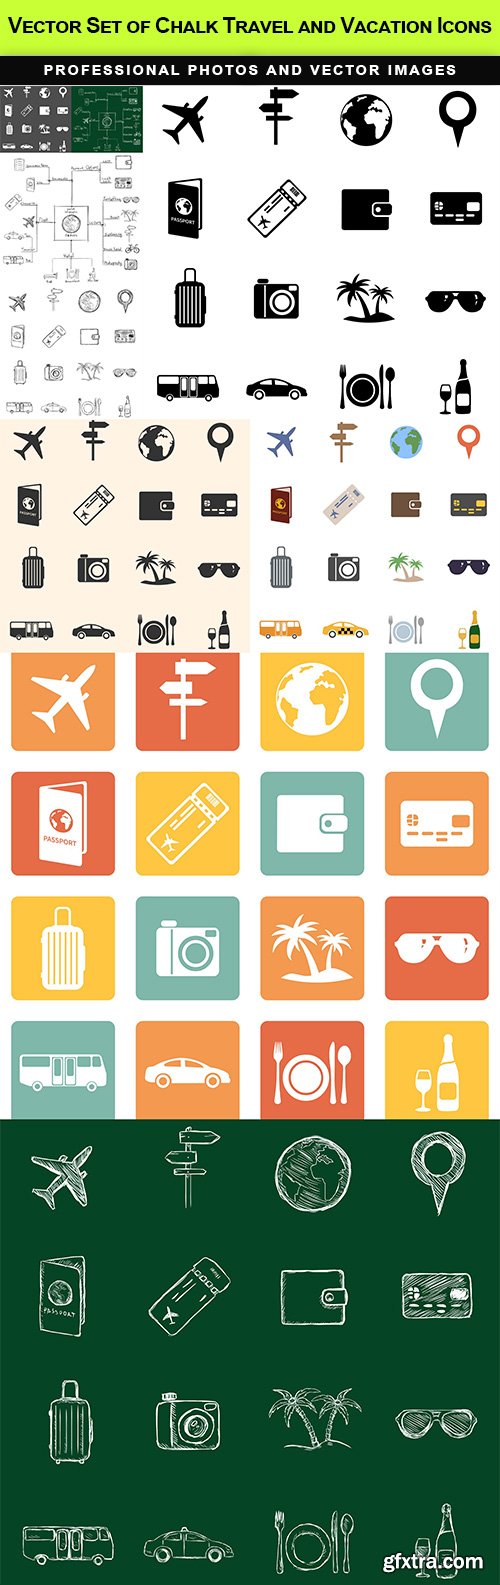 Vector Set of Chalk Travel and Vacation Icons